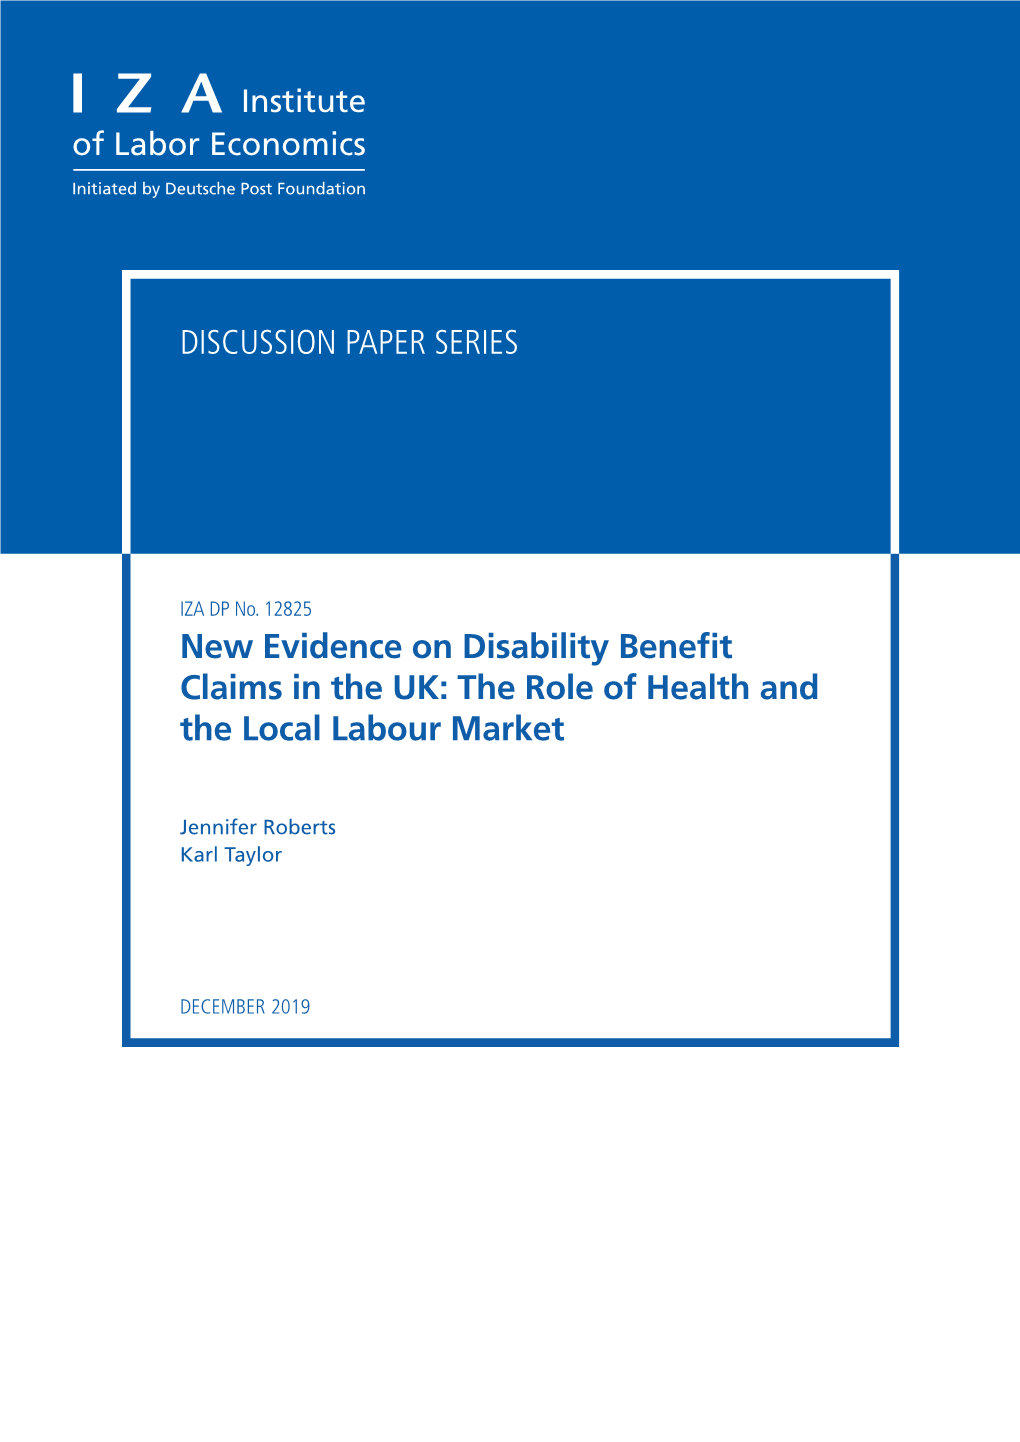 New Evidence on Disability Benefit Claims in the UK: the Role of Health and the Local Labour Market